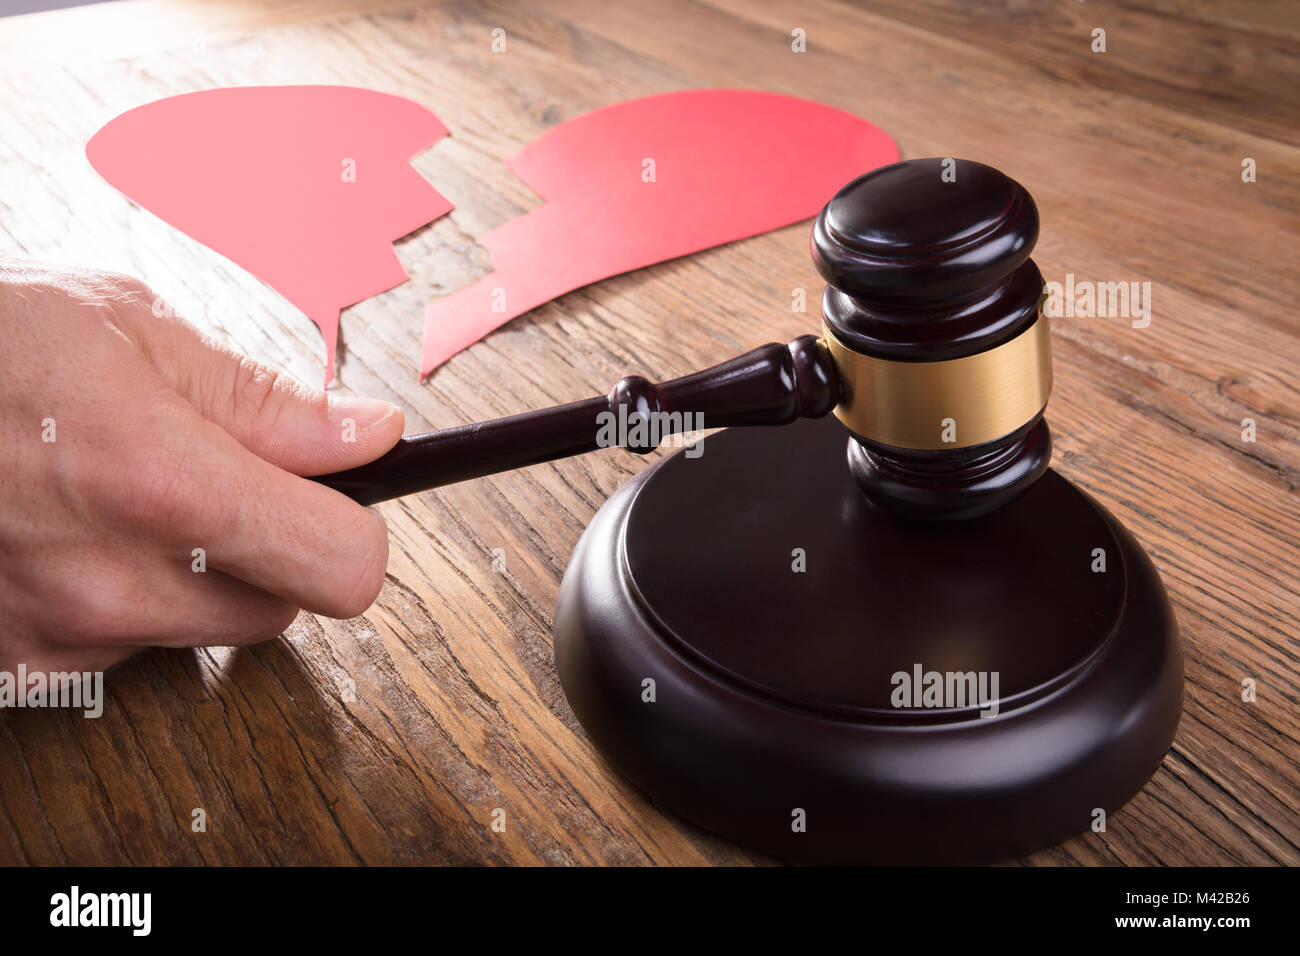 Cropped Image Of Divorce Judge With Broken Heart At Desk Hitting Gavel In Courtroom Stock Photo